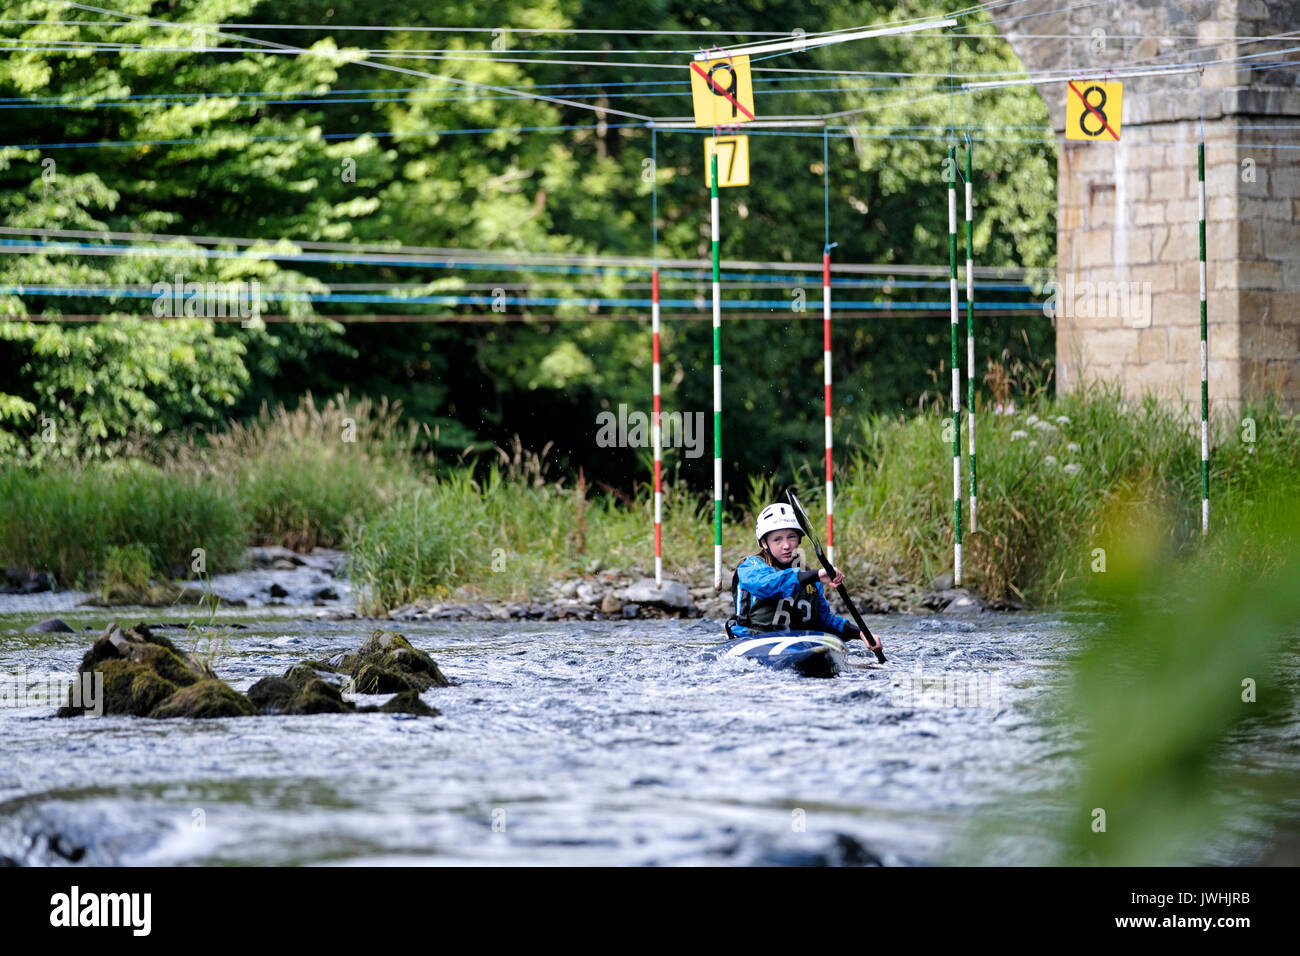 River Tweed, Yair Bridge, Selkirk, UK. 13th August 2017. Canoe Slalom at Yair Bridge A canoeist negotiates the slalom course at Yair Bridge, on the River Tweed, near Selkirk during the Div 2/3 and Scottish J14 & J12 Championships. The event organised by local club Leithen Water Paddlers. Stock Photo